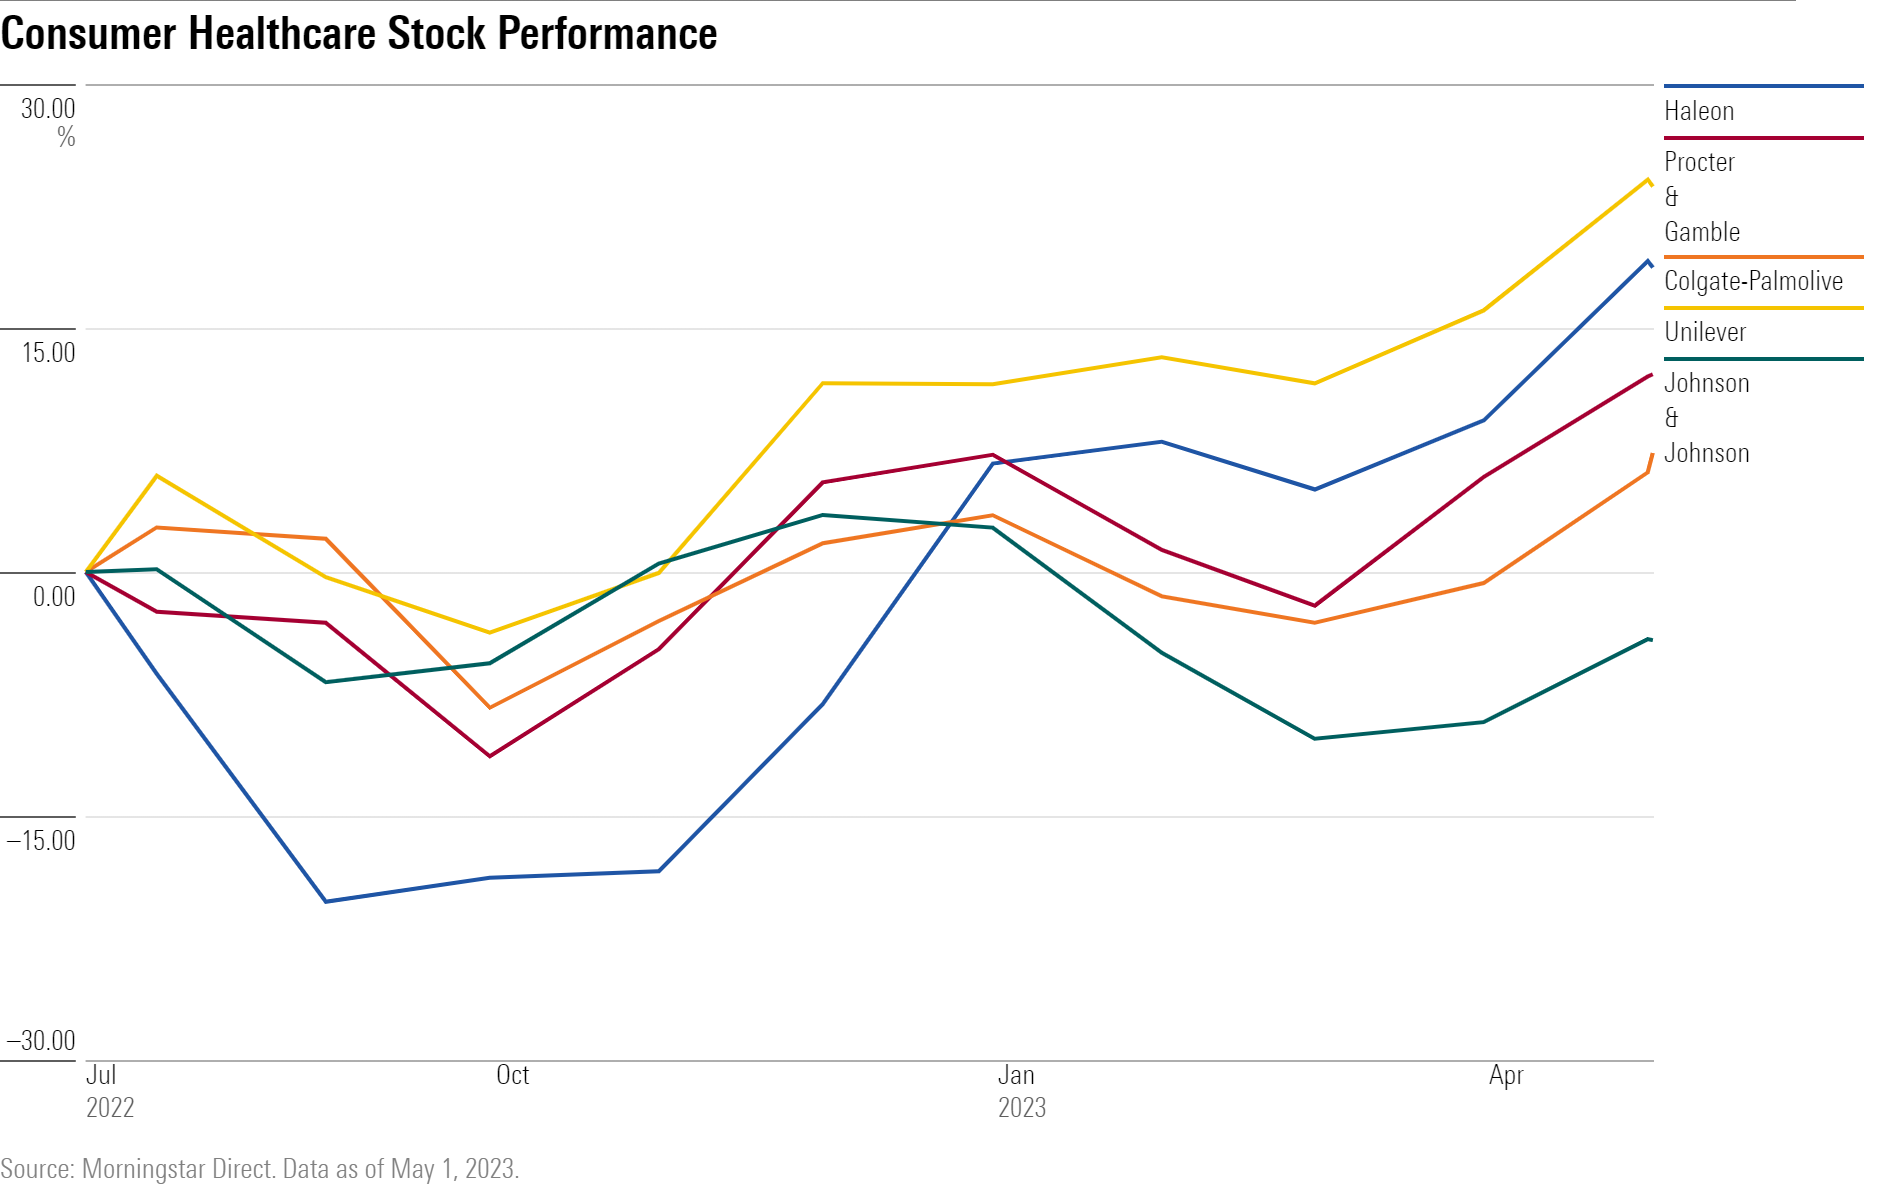 A line chart tracking the performance of consumer healthcare stocks since the spinoff of GSK's Haleon unit in July 2022.